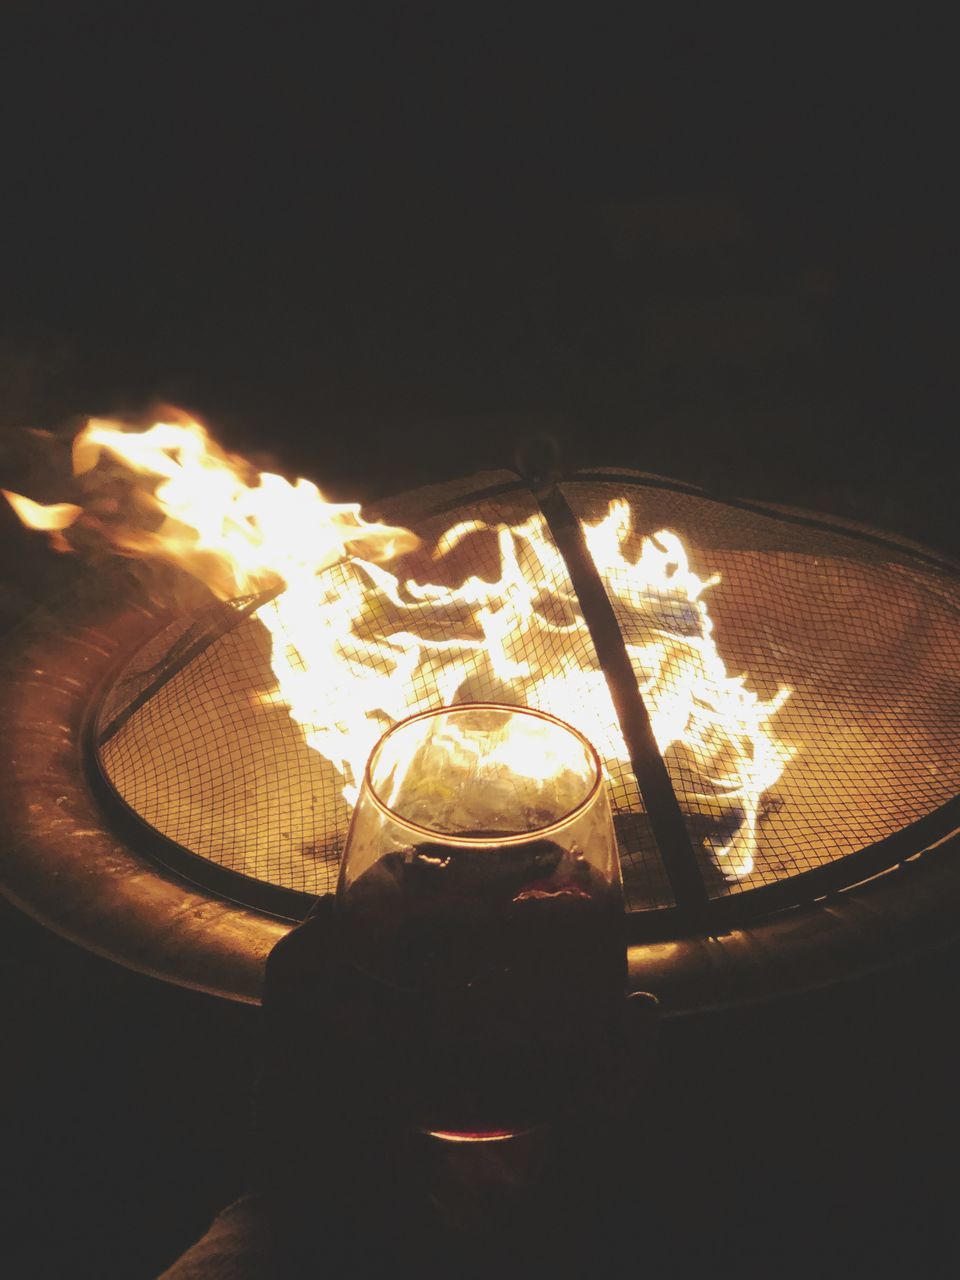 burning, heat - temperature, fire, flame, fire - natural phenomenon, glowing, nature, close-up, food and drink, no people, indoors, food, illuminated, night, motion, high angle view, dark, preparation, lighting equipment, kitchen utensil